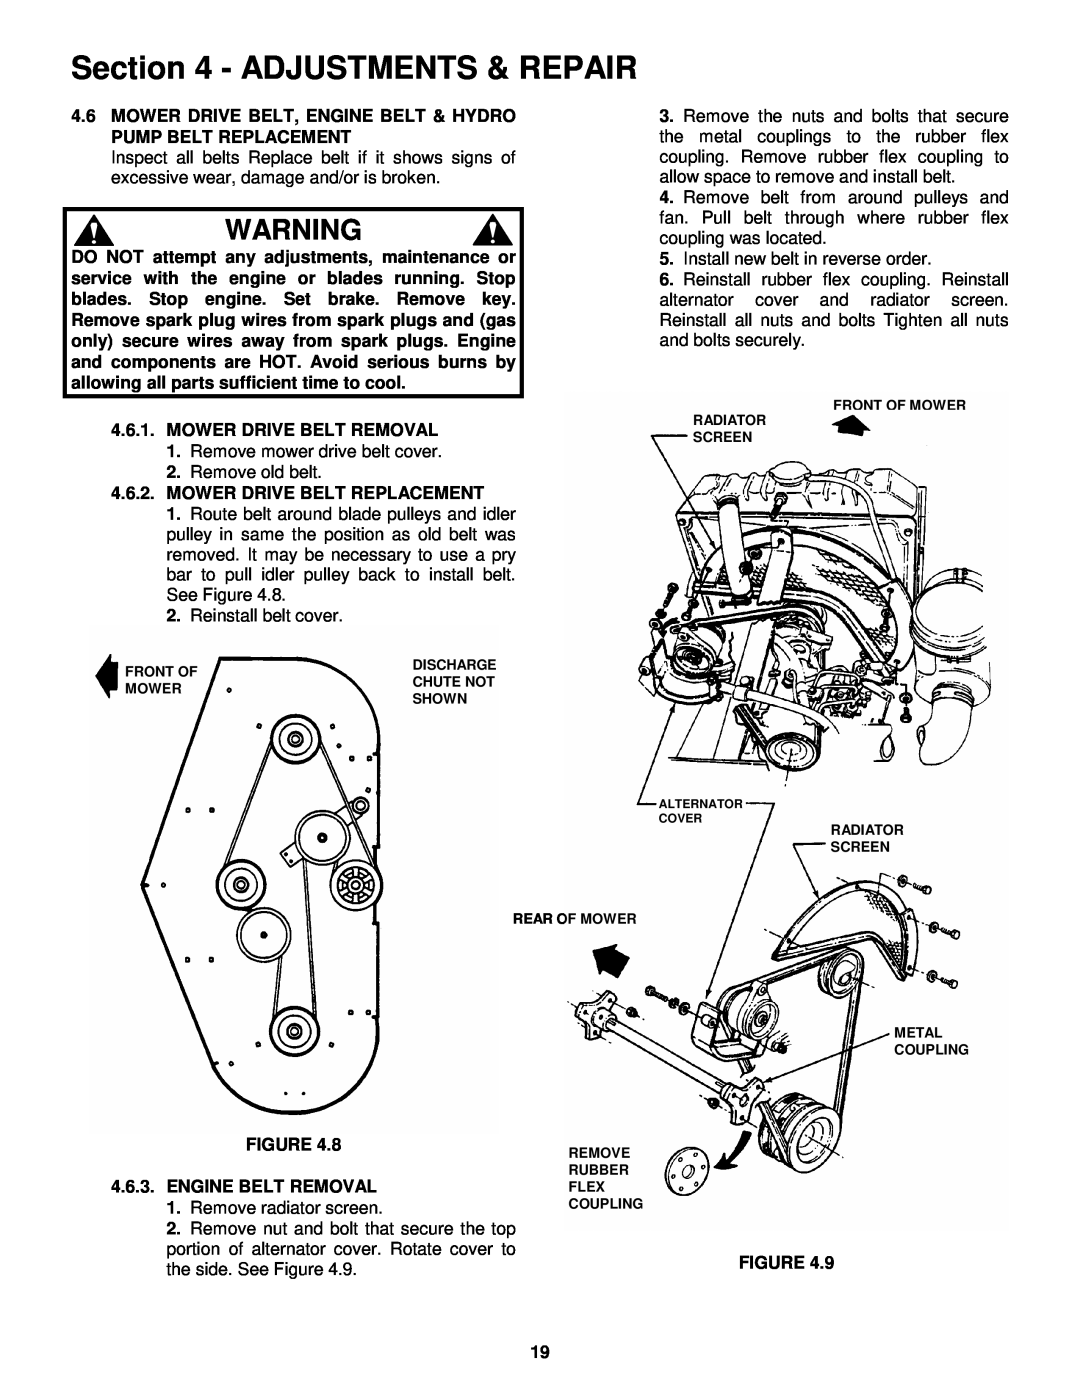 Snapper ZF2300GKU, ZF2100DKU, ZF5200M, ZF6100M important safety instructions Adjustments & Repair, Mower Drive Belt Removal 